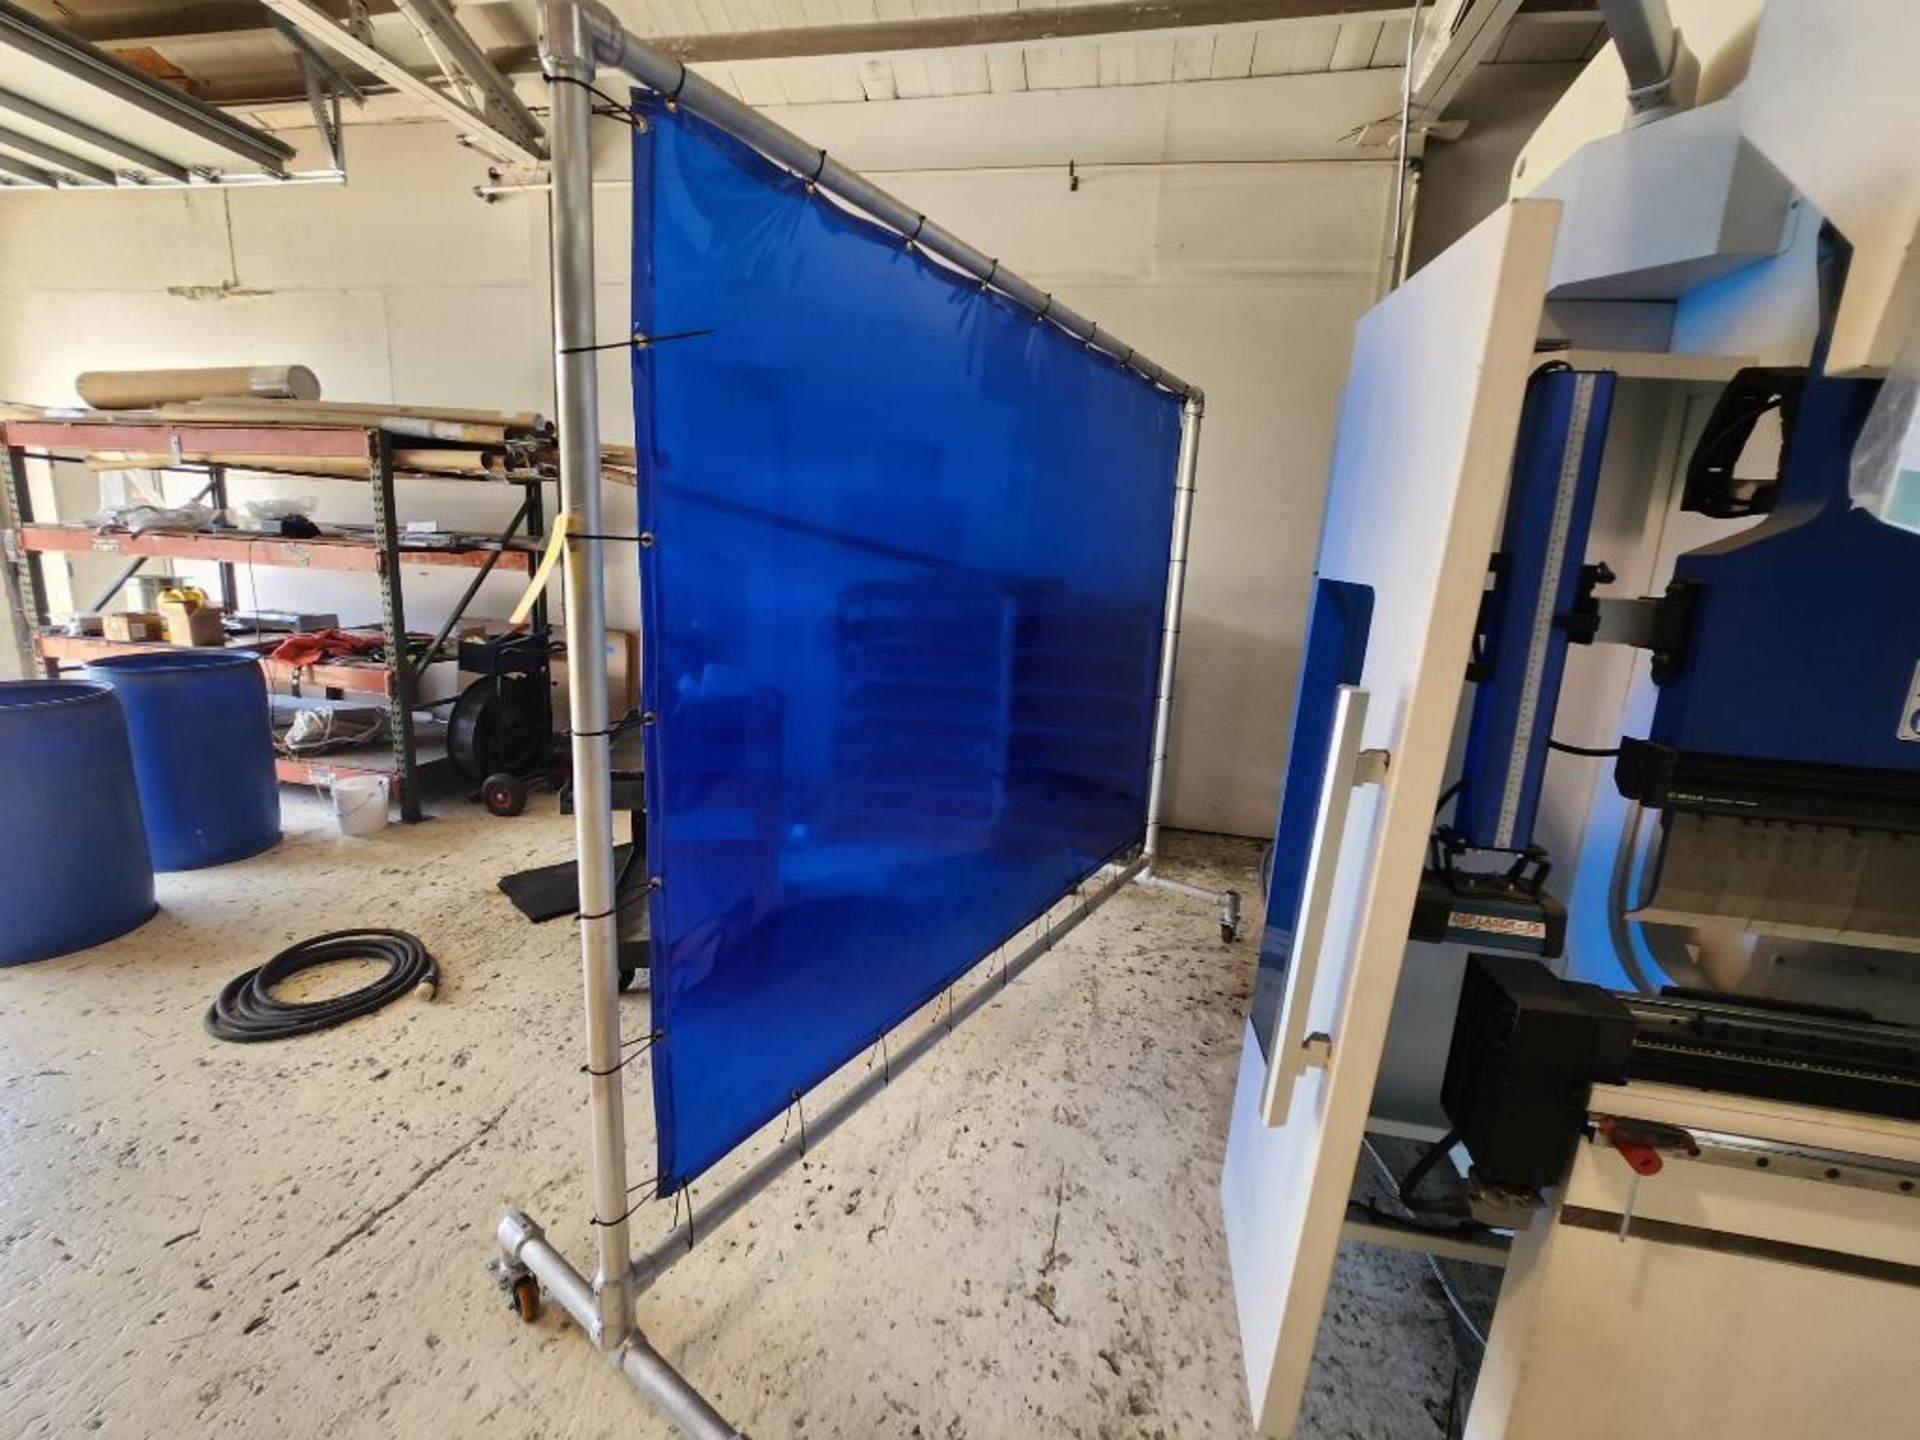 Aluminum Welding Screen Frame on Casters, w/ Screen - Image 3 of 3